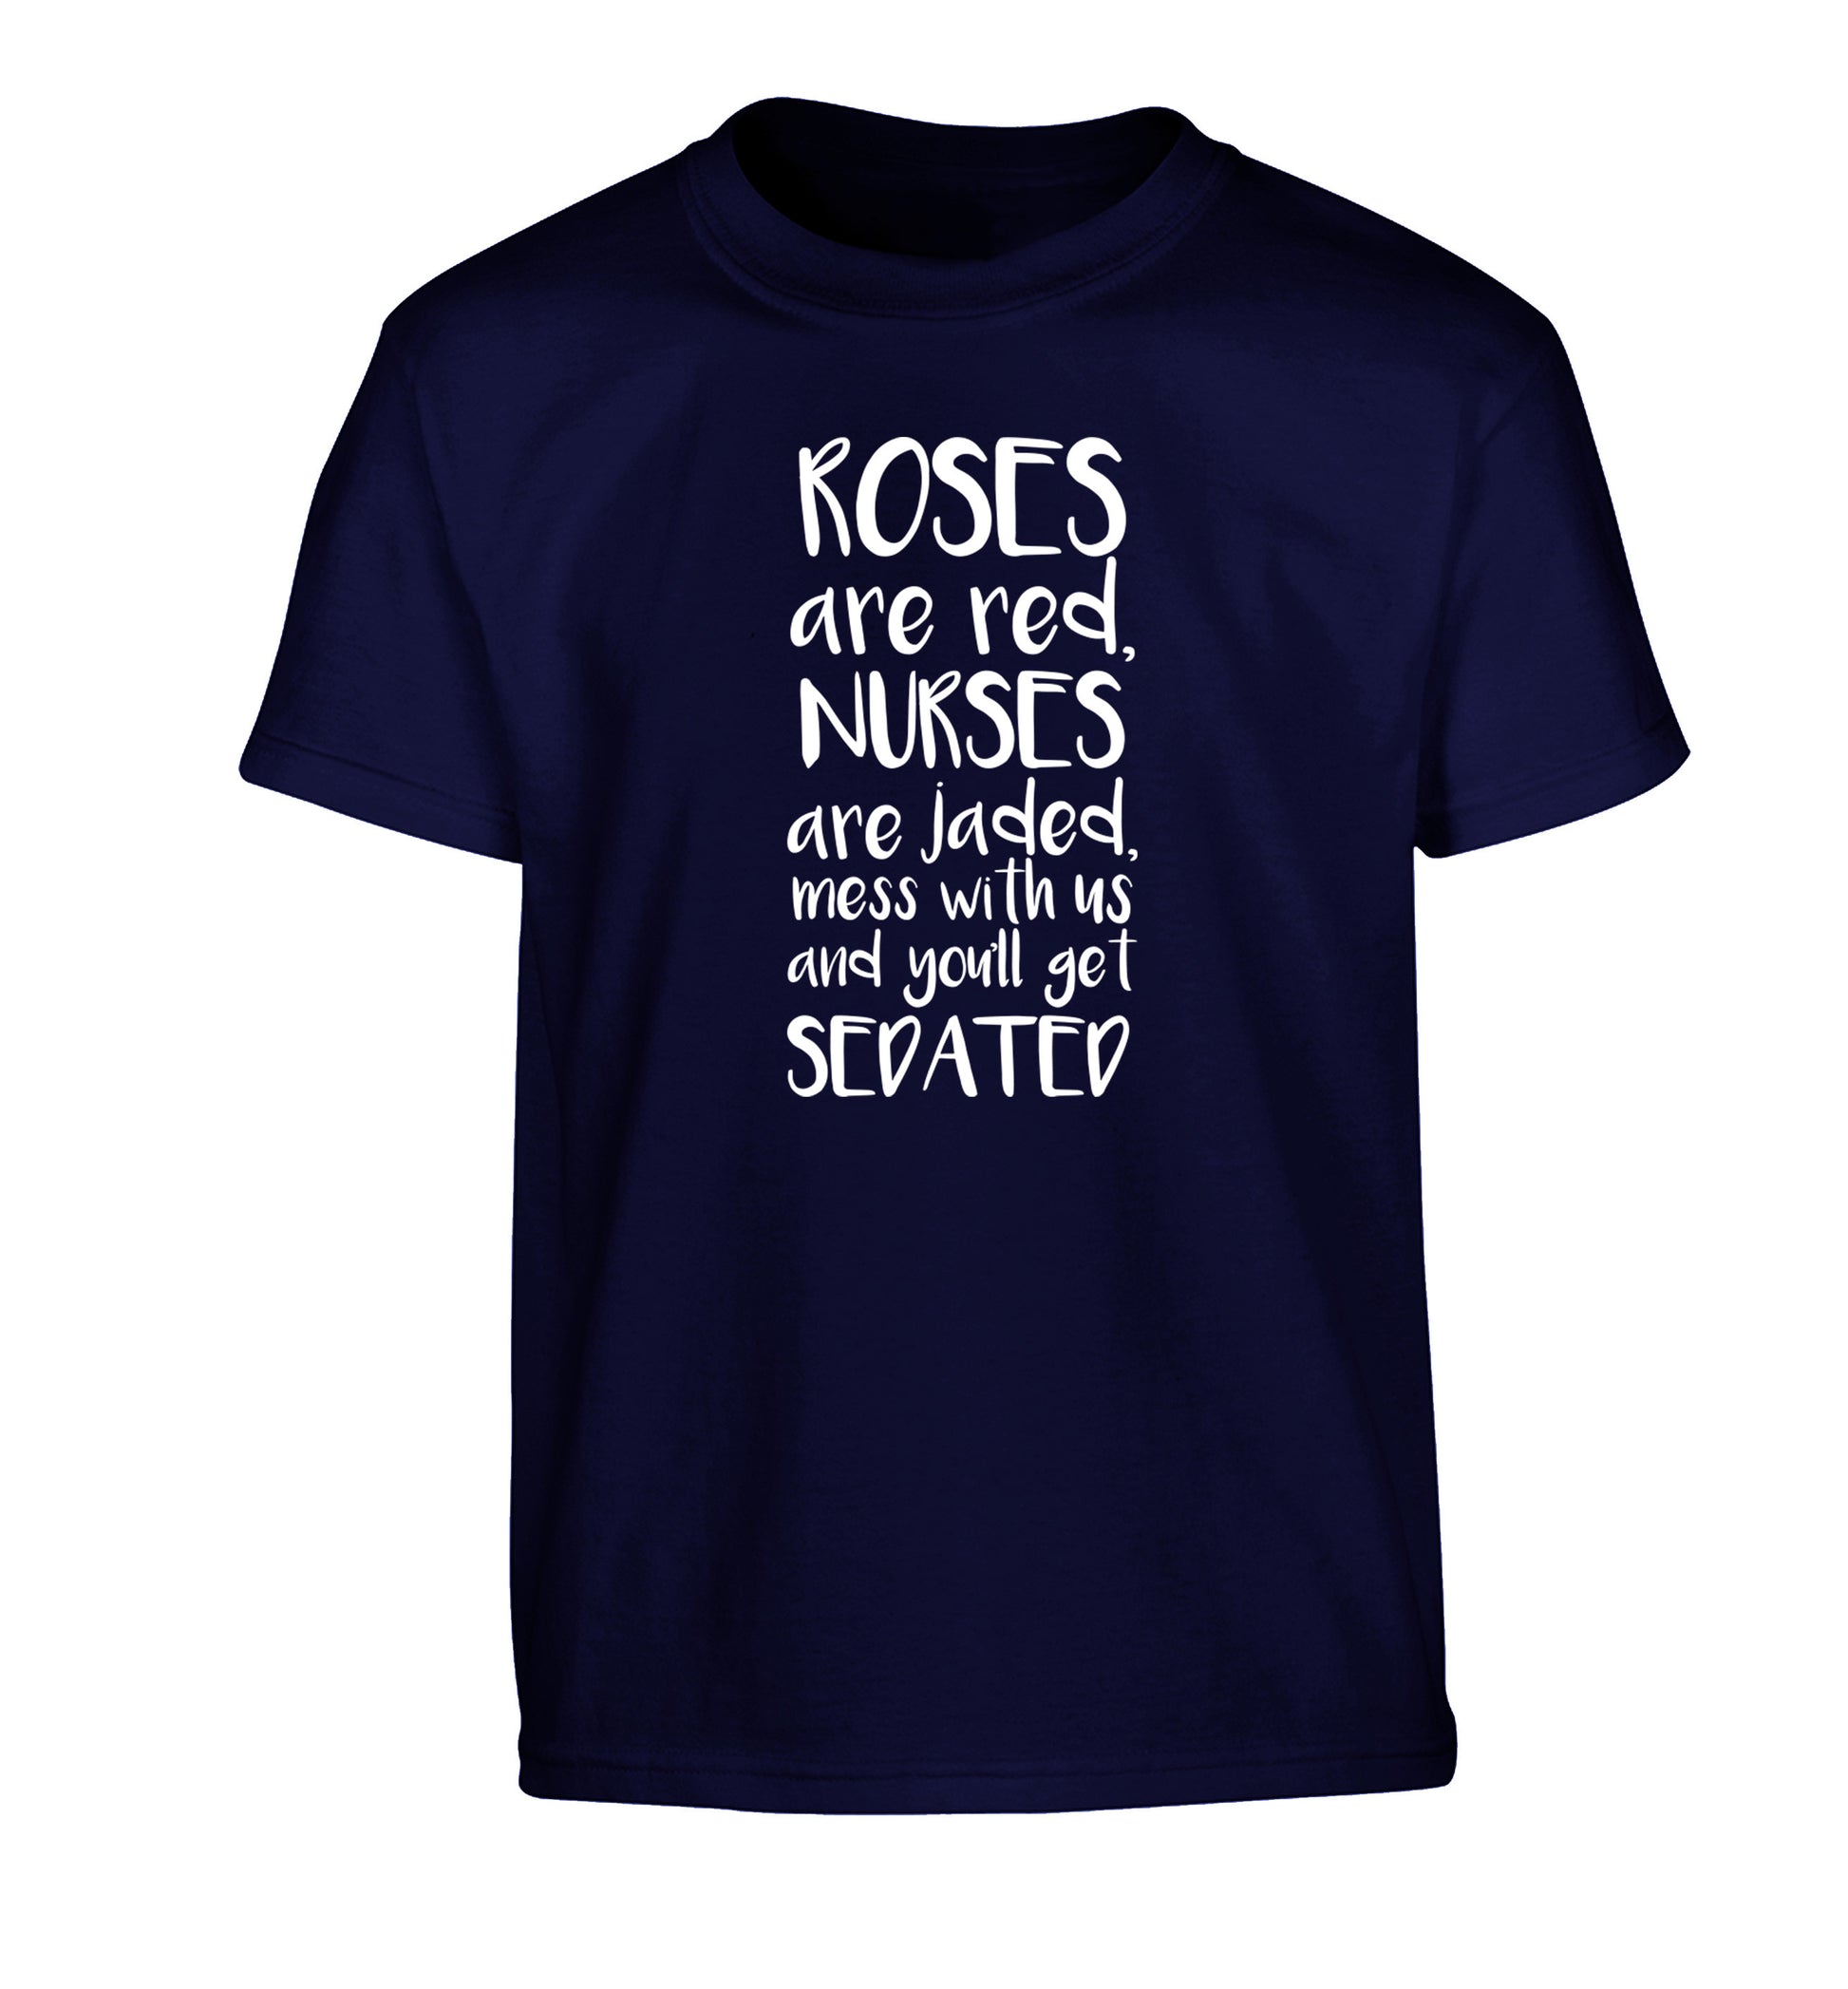 Roses are red, nurses are jaded, mess with us and you'll get sedated Children's navy Tshirt 12-14 Years